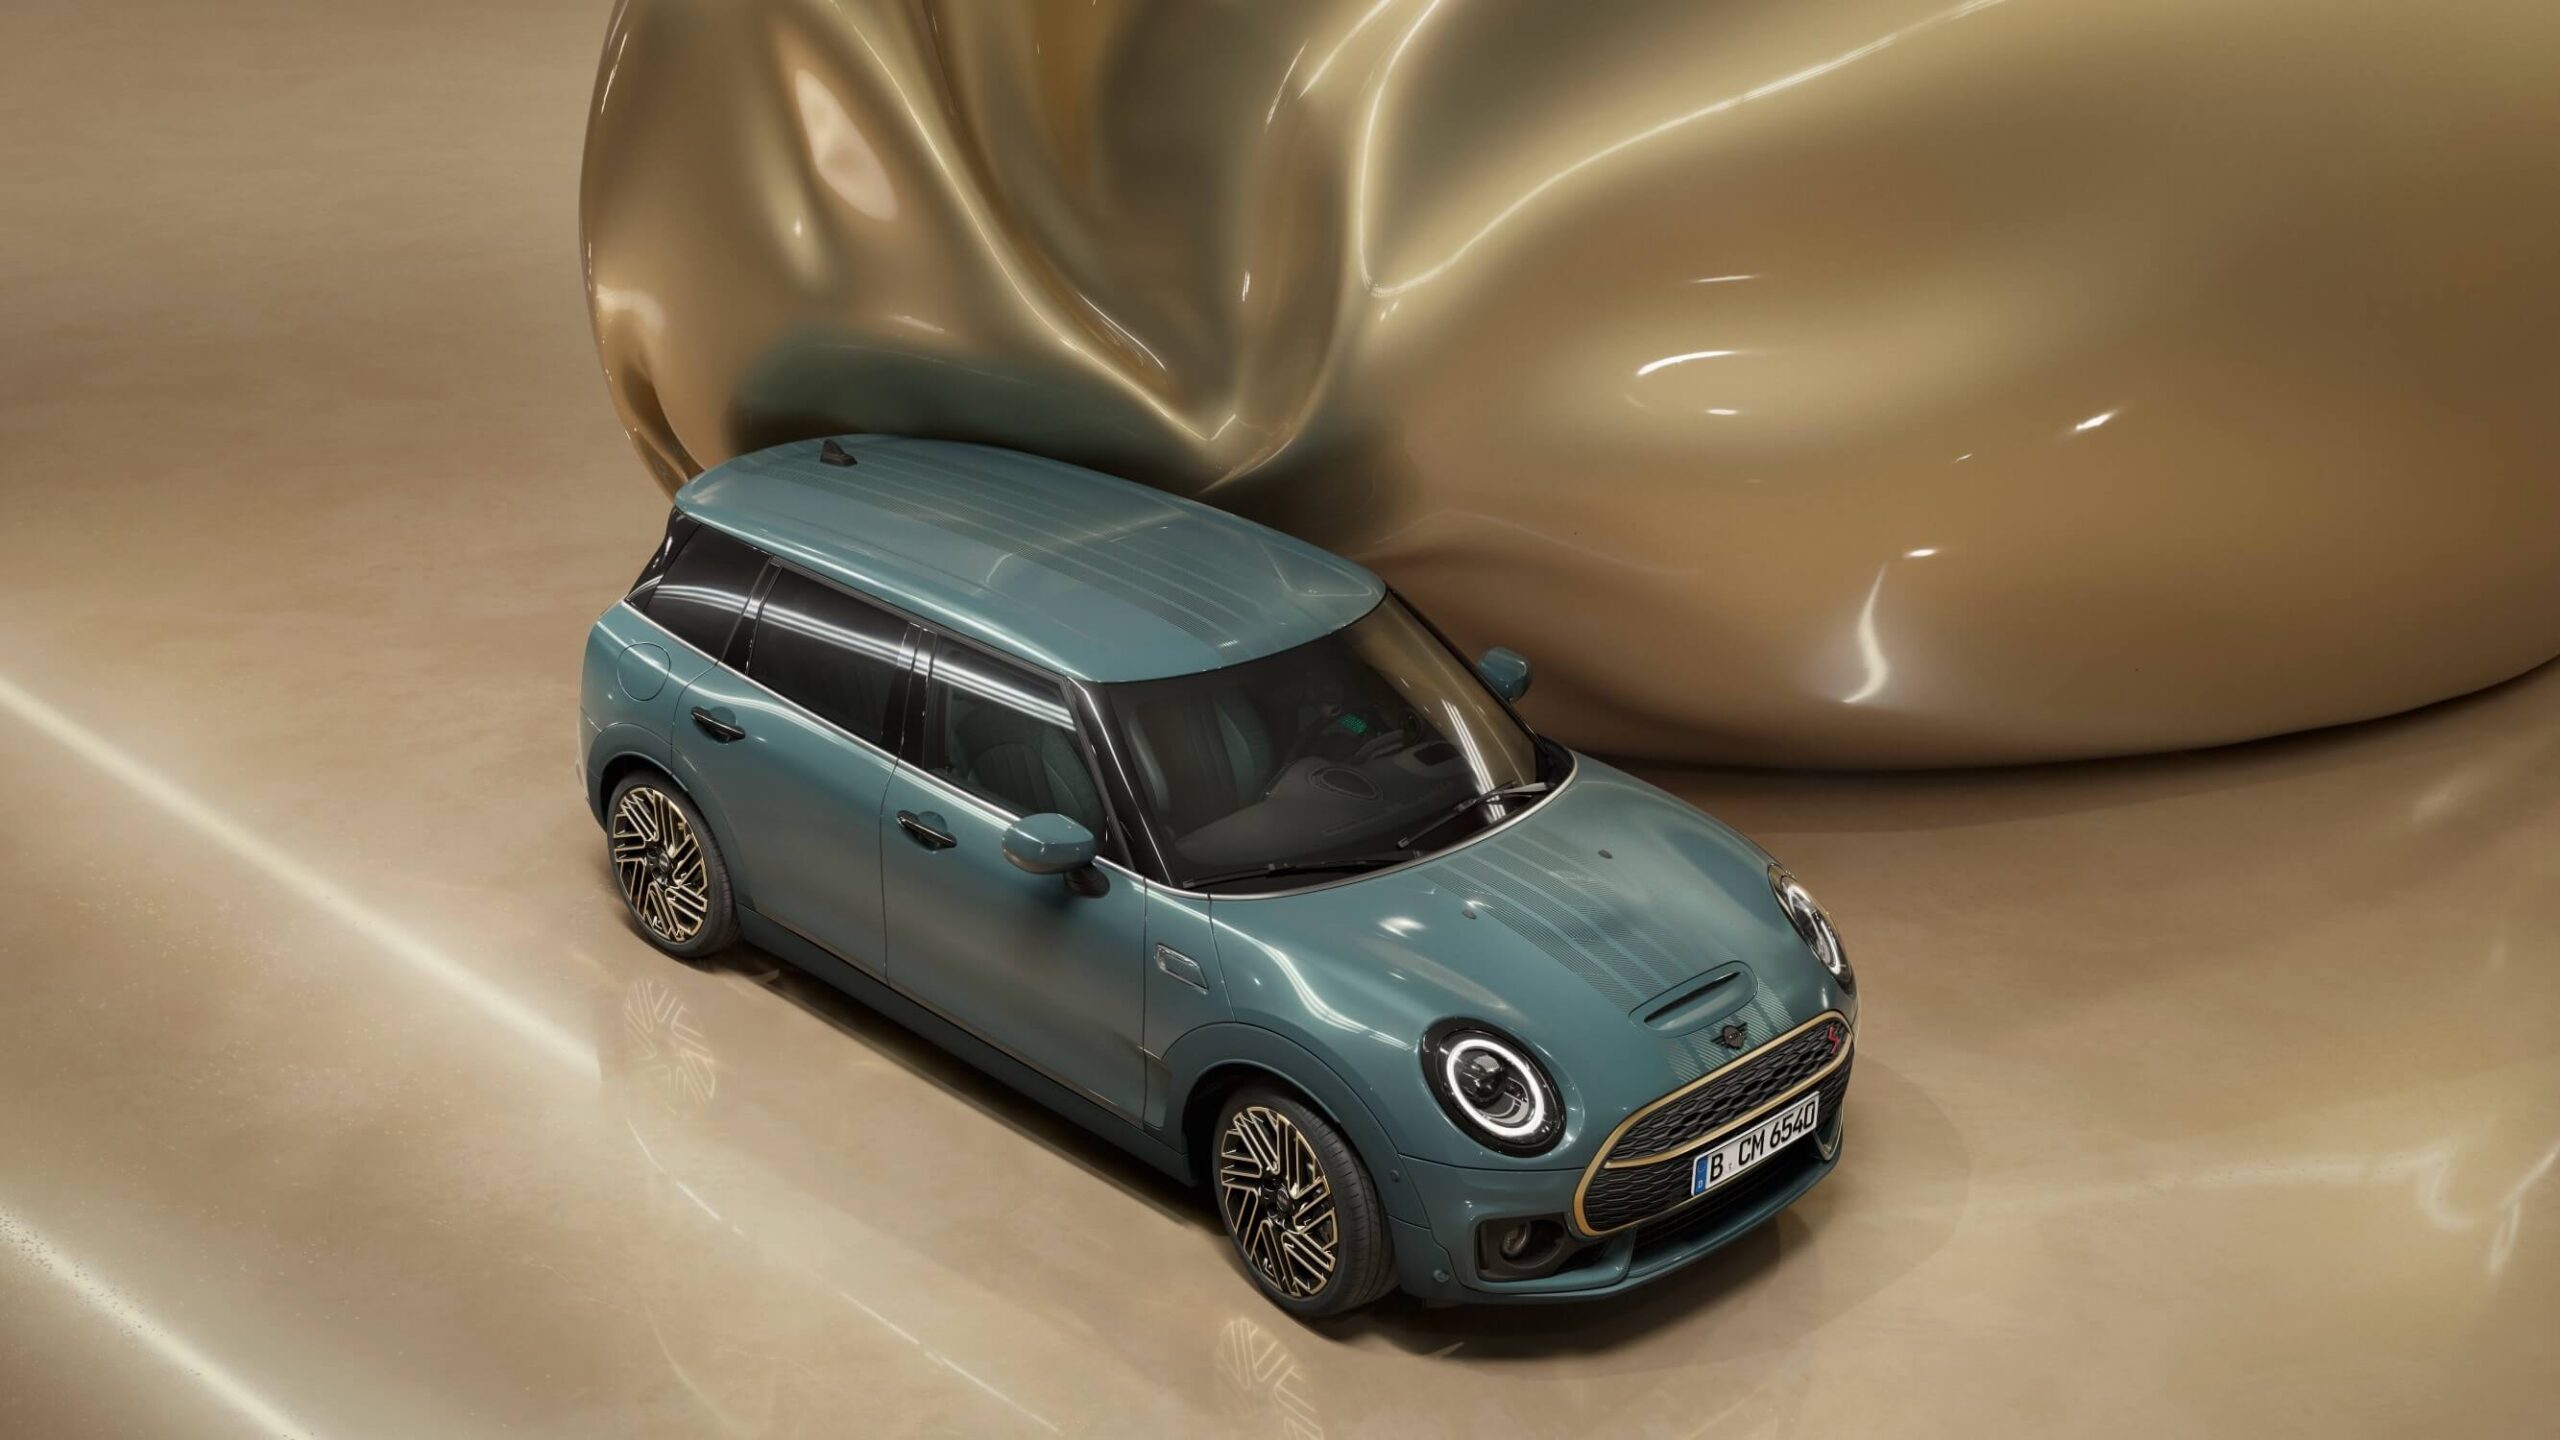 The new Mini Edition family 2022: the same fun character with a sharper design